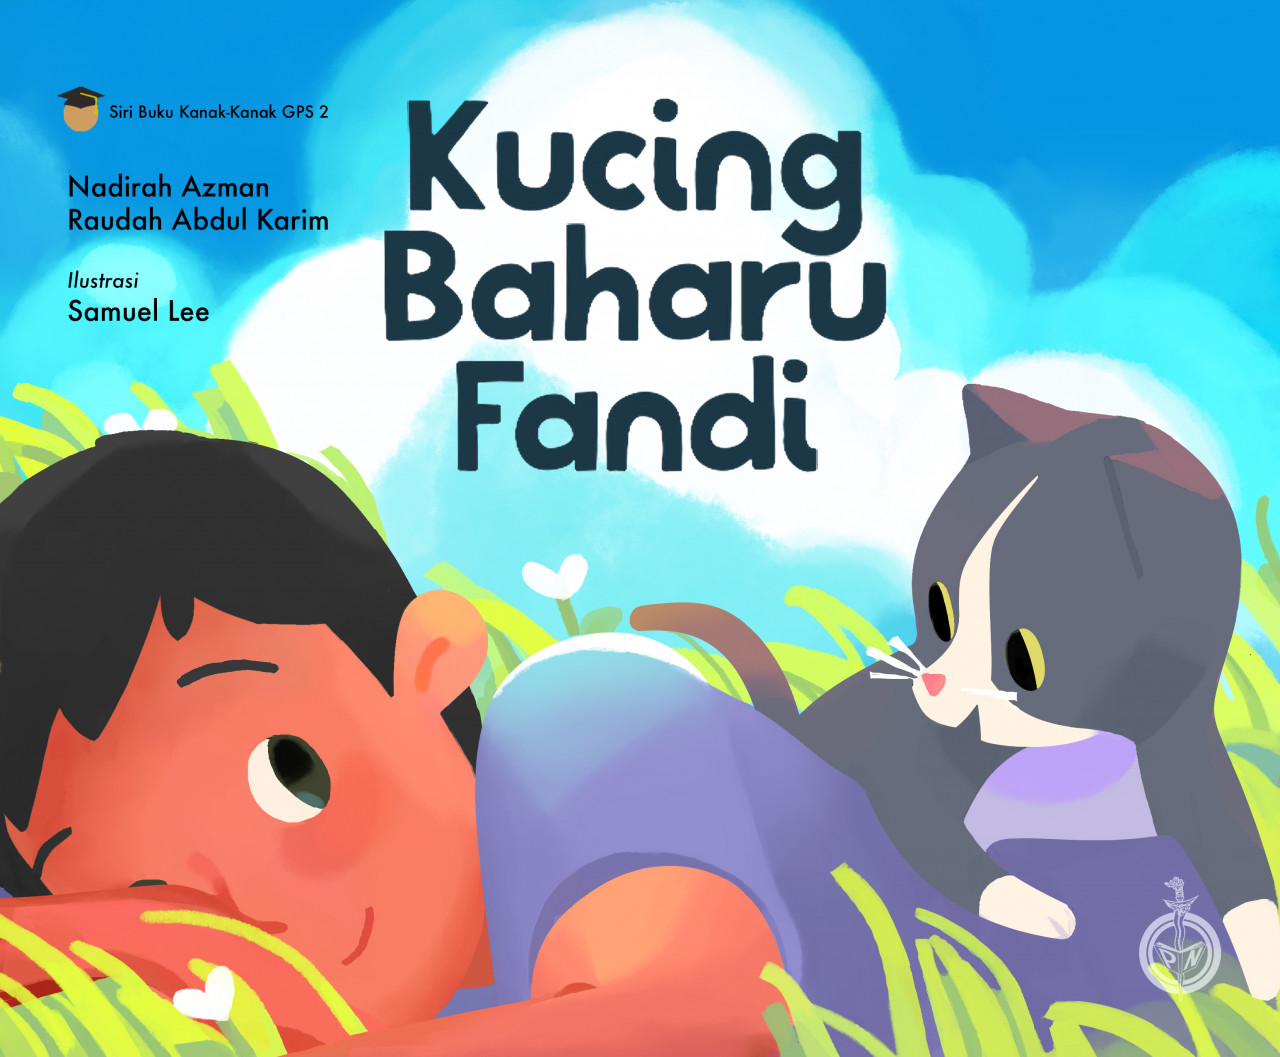  Lee’s work for Kucing Baharu Fandi. Kucing Baharu Fandi is the proud recipient of the Lee Kuan Yew Fund for Bilingualism. – Pic courtesy of Lee Samuel